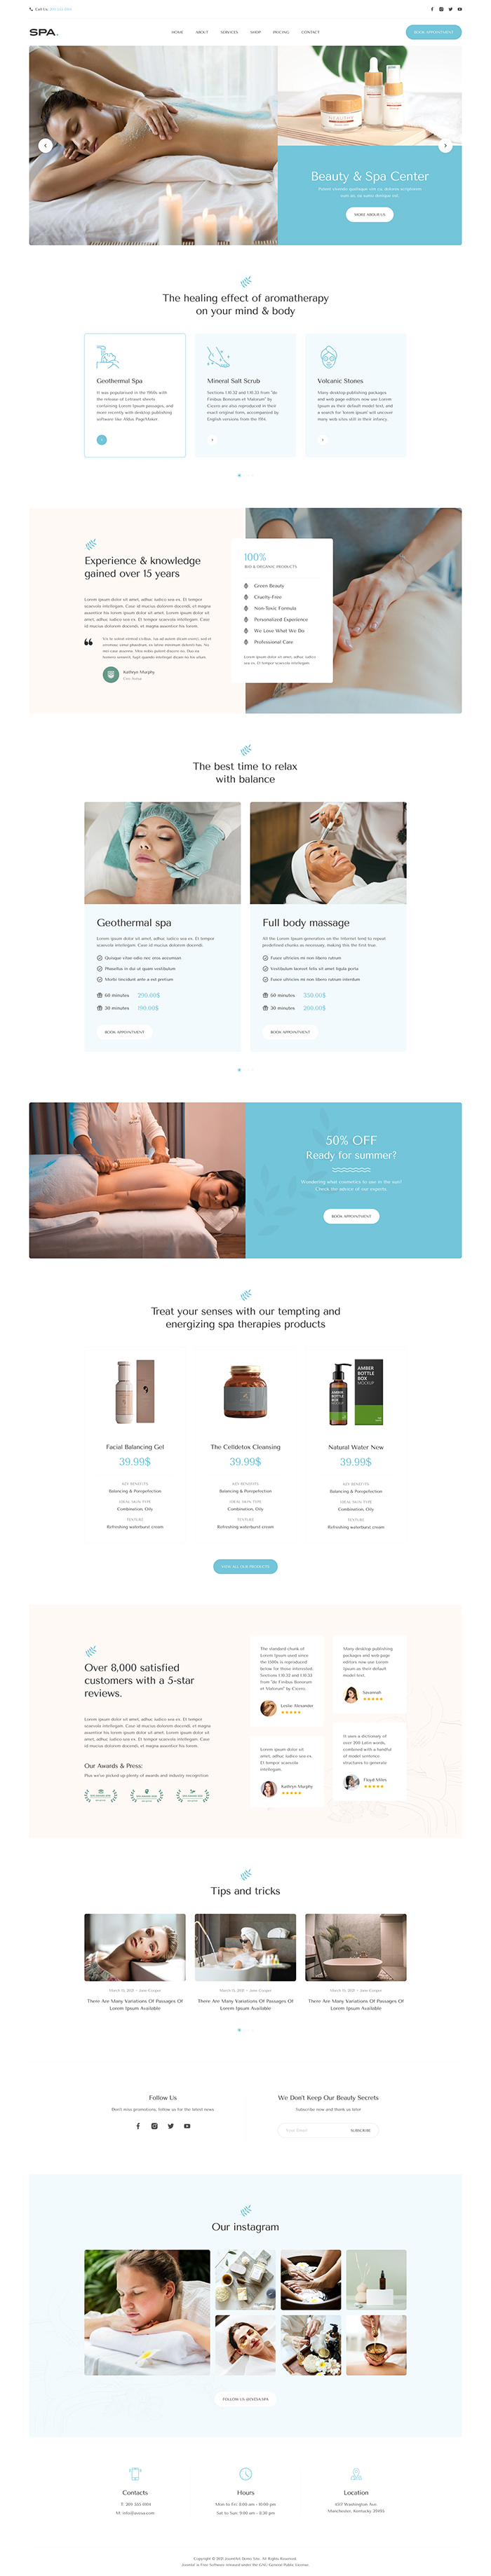 joomla page builder template for spa and beauty salon